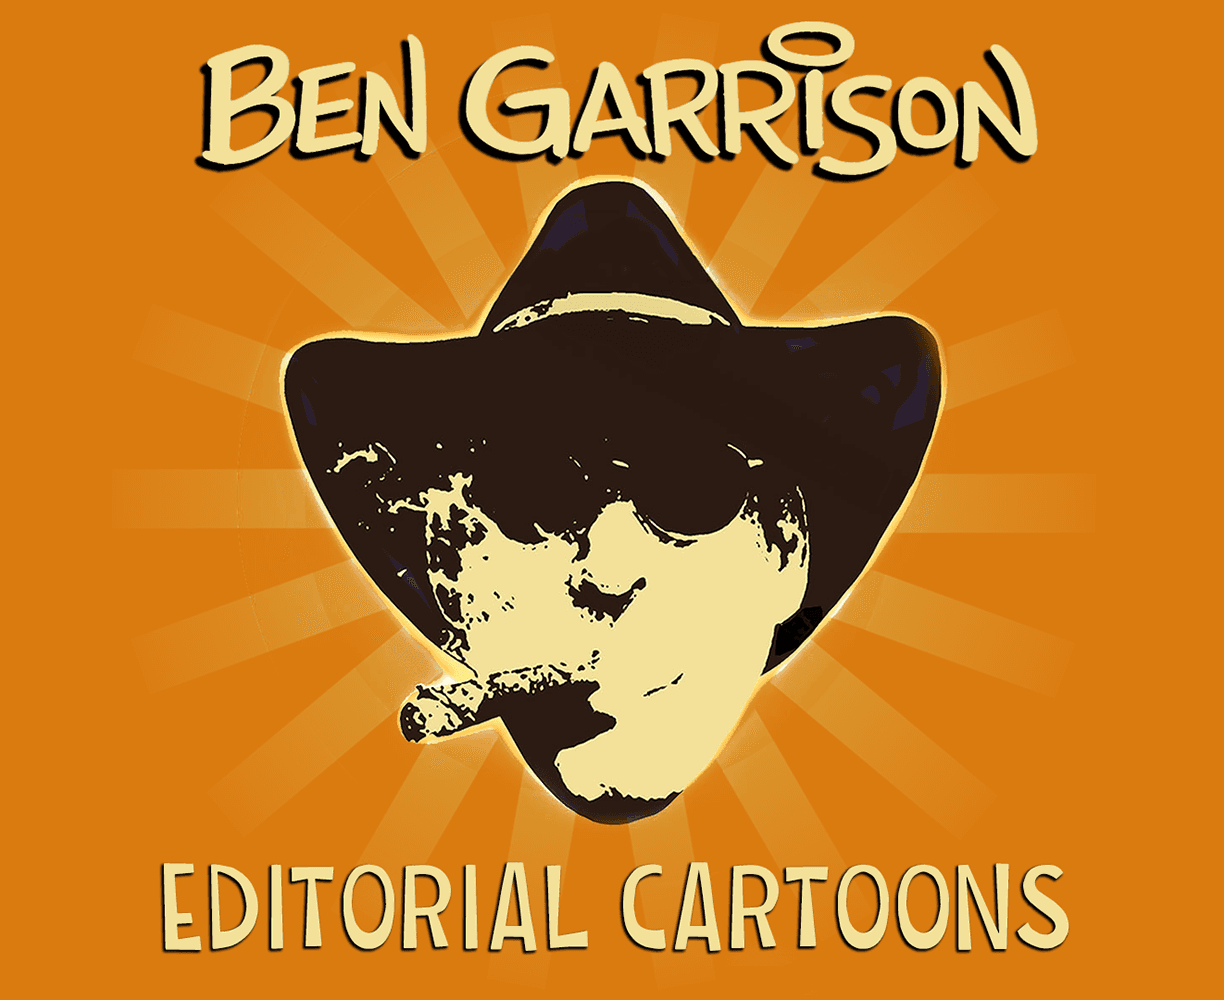 The cover art for the episode Nothing Burger from the comics series Ben Garrison, which is number 140 in the series